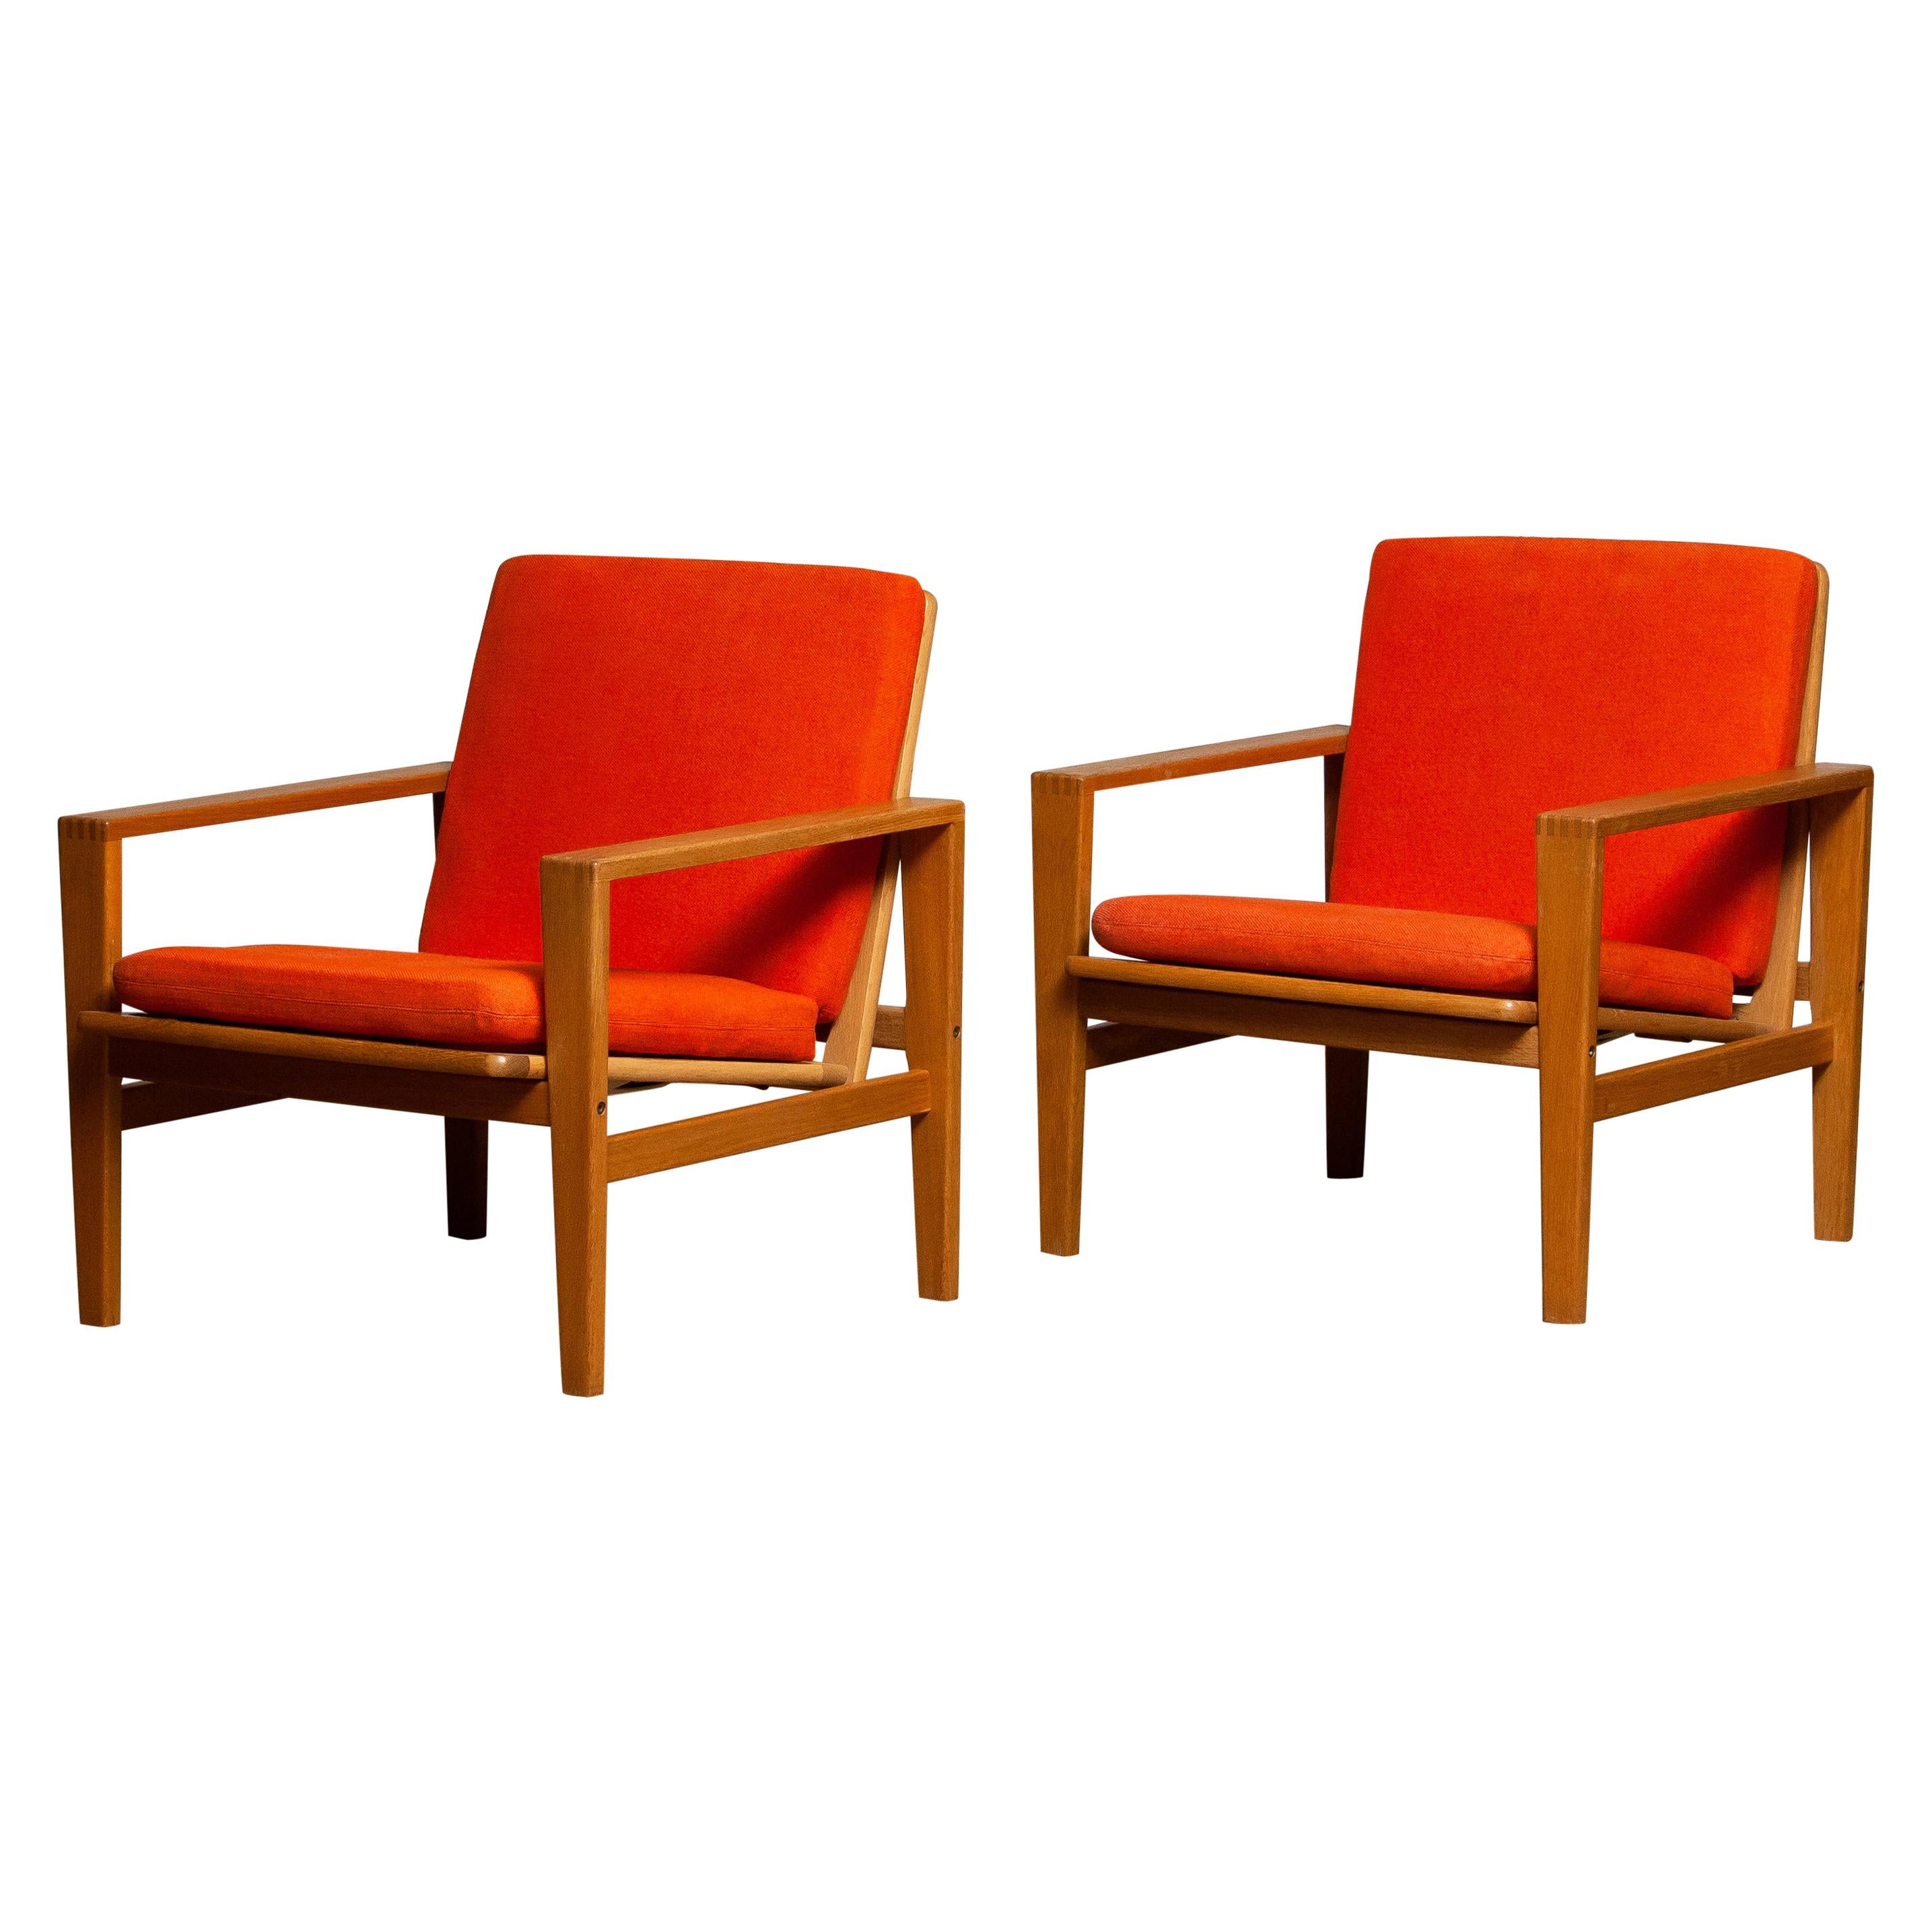 Comfortable Scandinavian set of two lounge chairs designed by Erik Merthen for Ire Skillingaryd, Sweden, 1960s.
The oak frames are in perfect condition as well as the leather belts who supports the backrest. The cushions have been newly